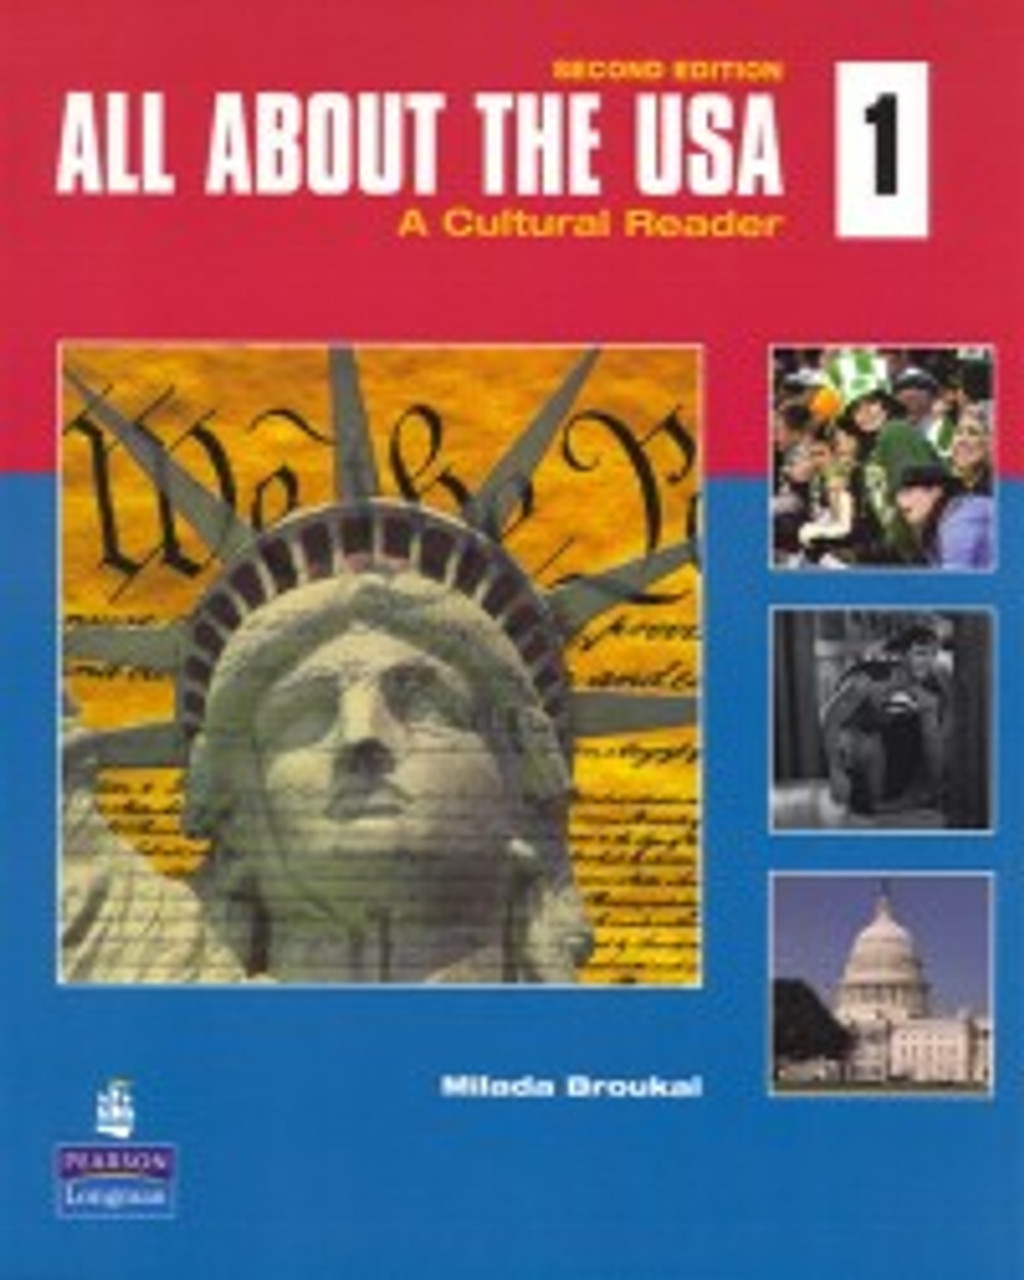 Book All about the Usa 9789963510139 by 5€ (Second Hand)